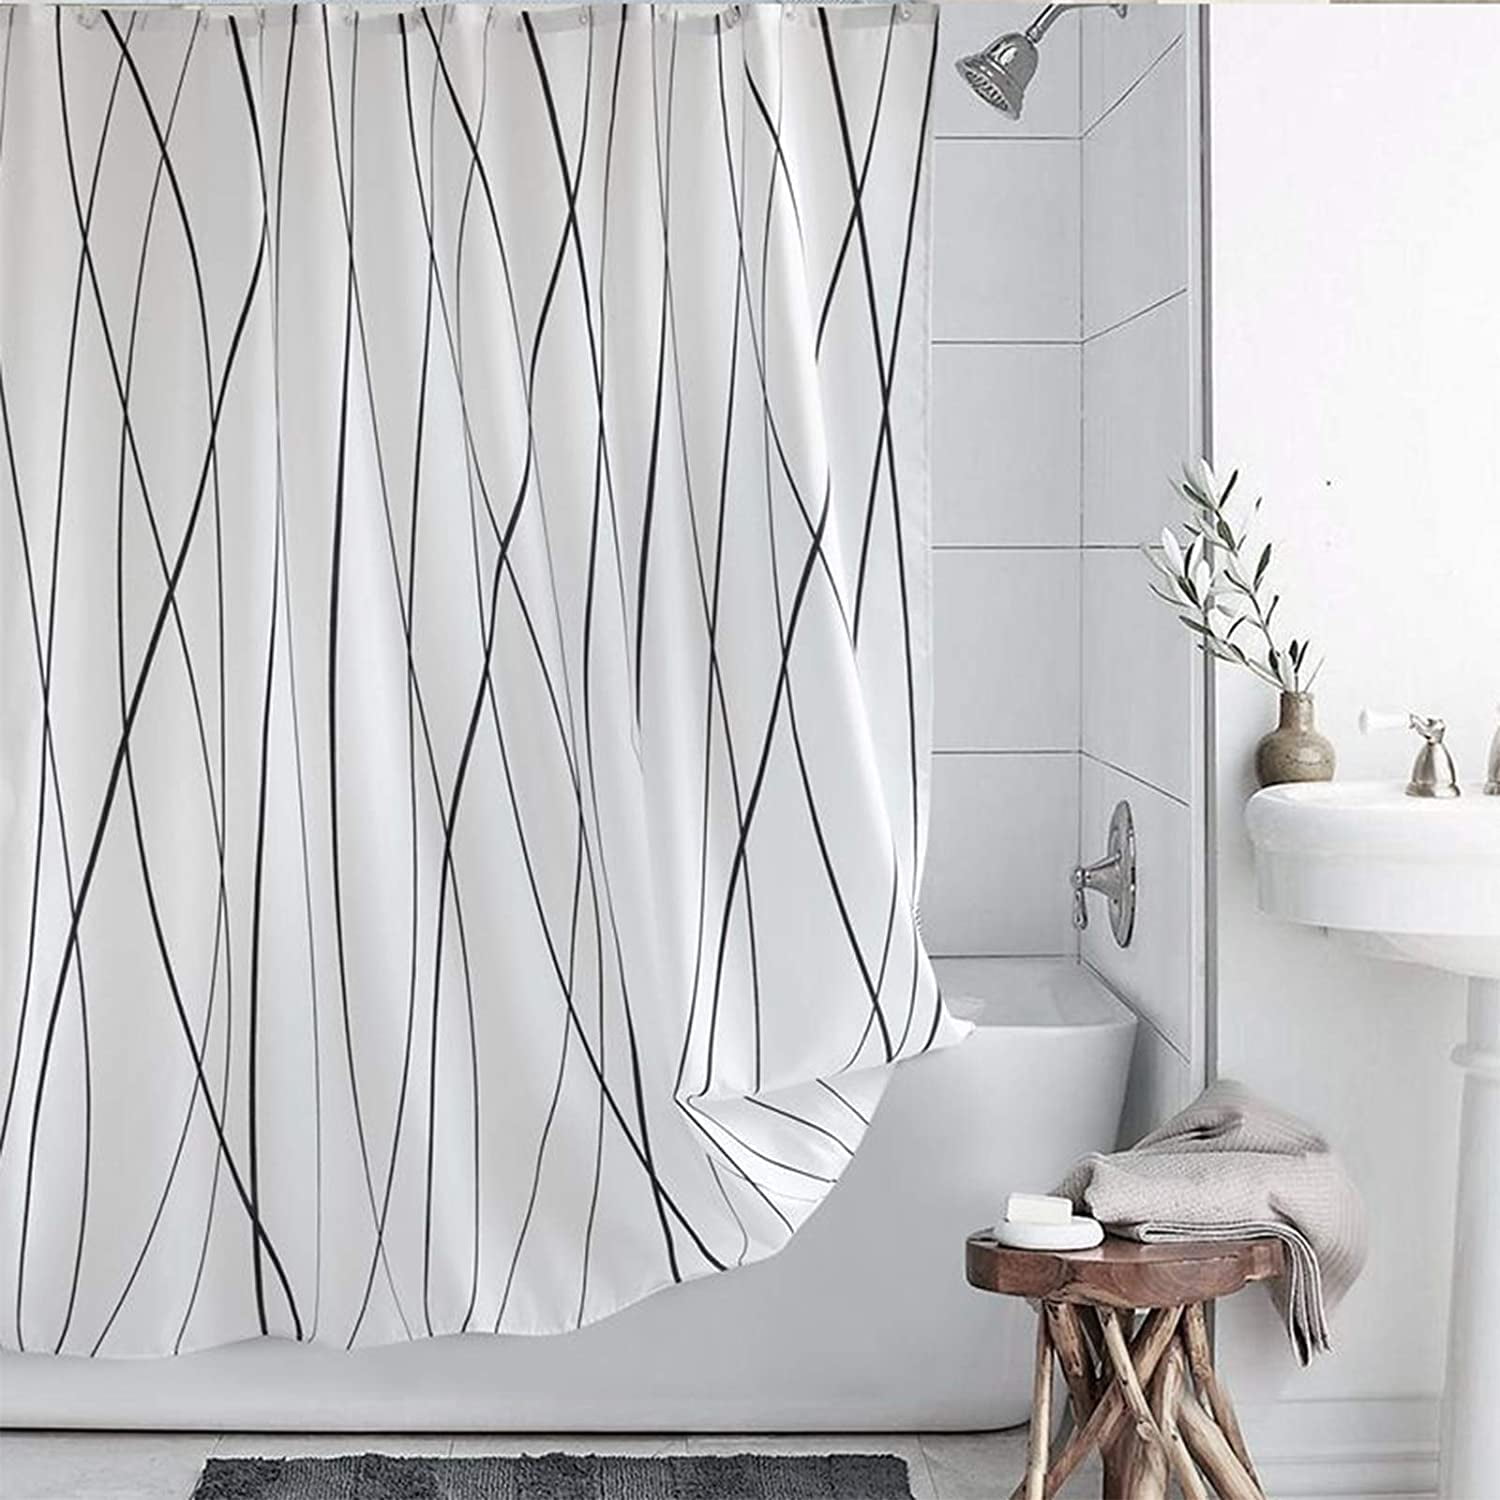 VIS'V Modern Water Resistant Polyester Shower Curtain Striped Fabric Shower Curtain Machine Washable with 12 Hooks for Bathroom Standard Size 72 x 72 Inch Black and White Shower Curtain